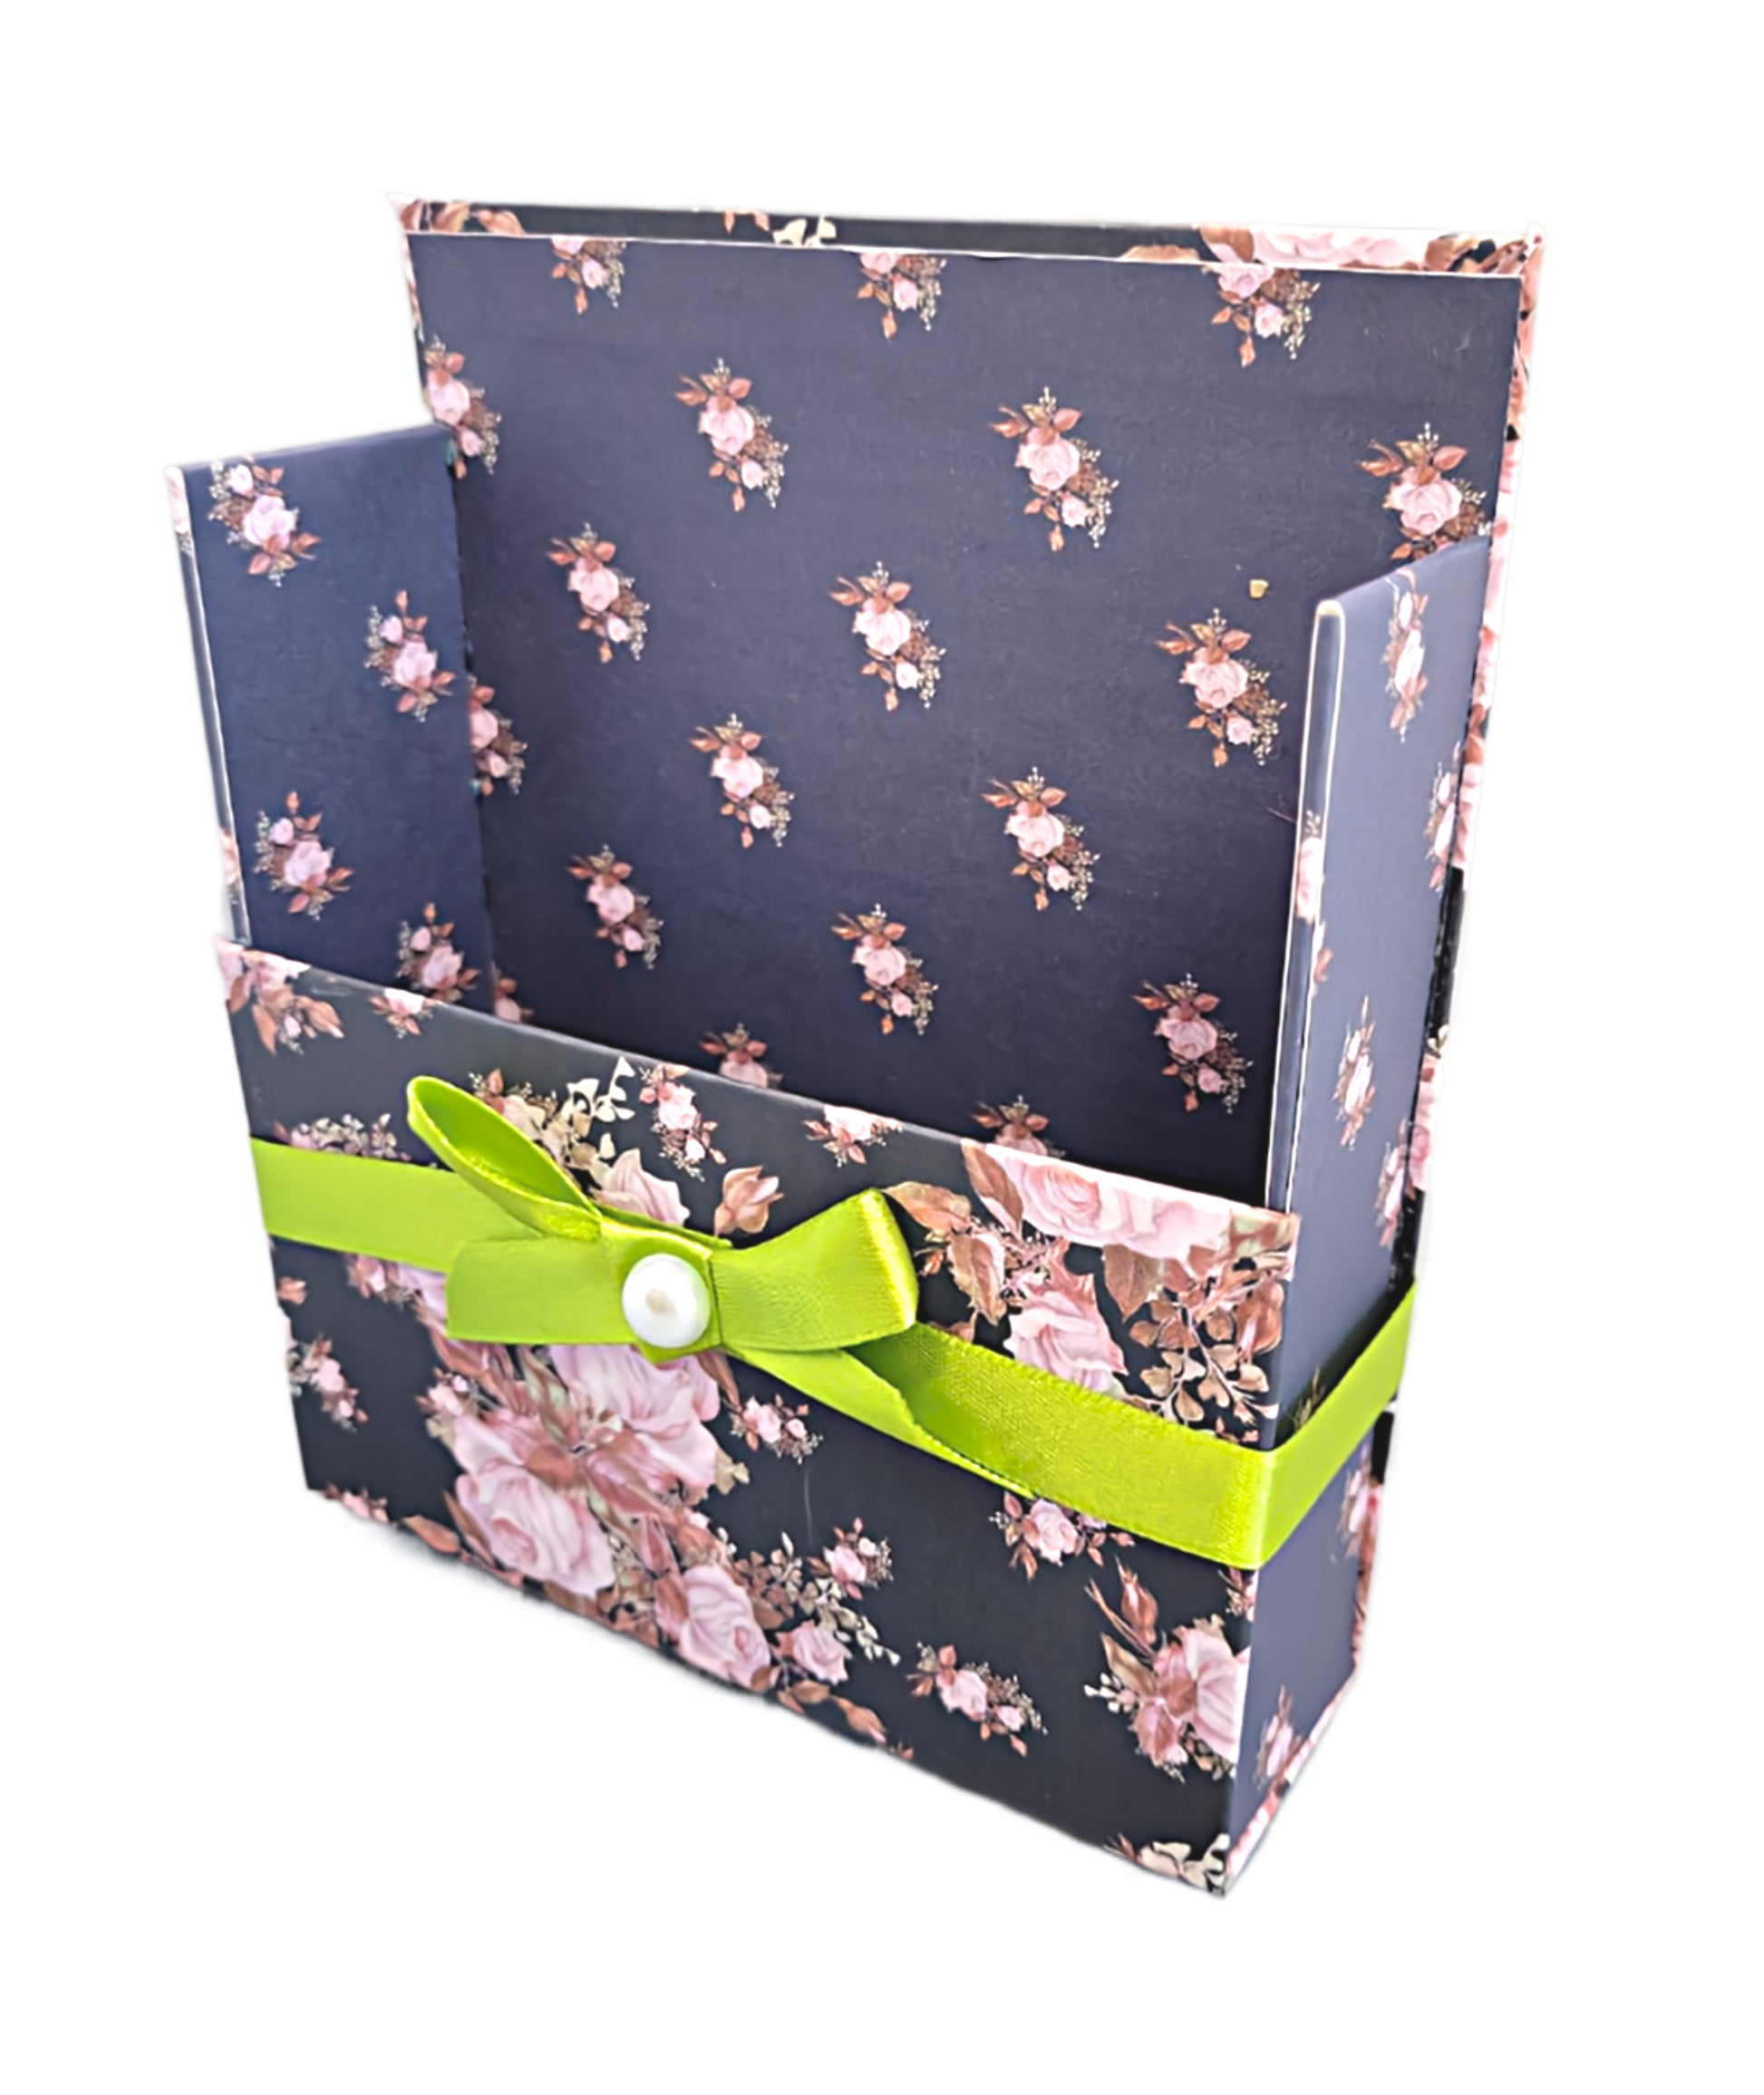 42-Pc Stationery Gift Box Set w/Reusable Desktop Organizer Box and Gold Pen - Pink & Coral Roses on Black - Chic Brico